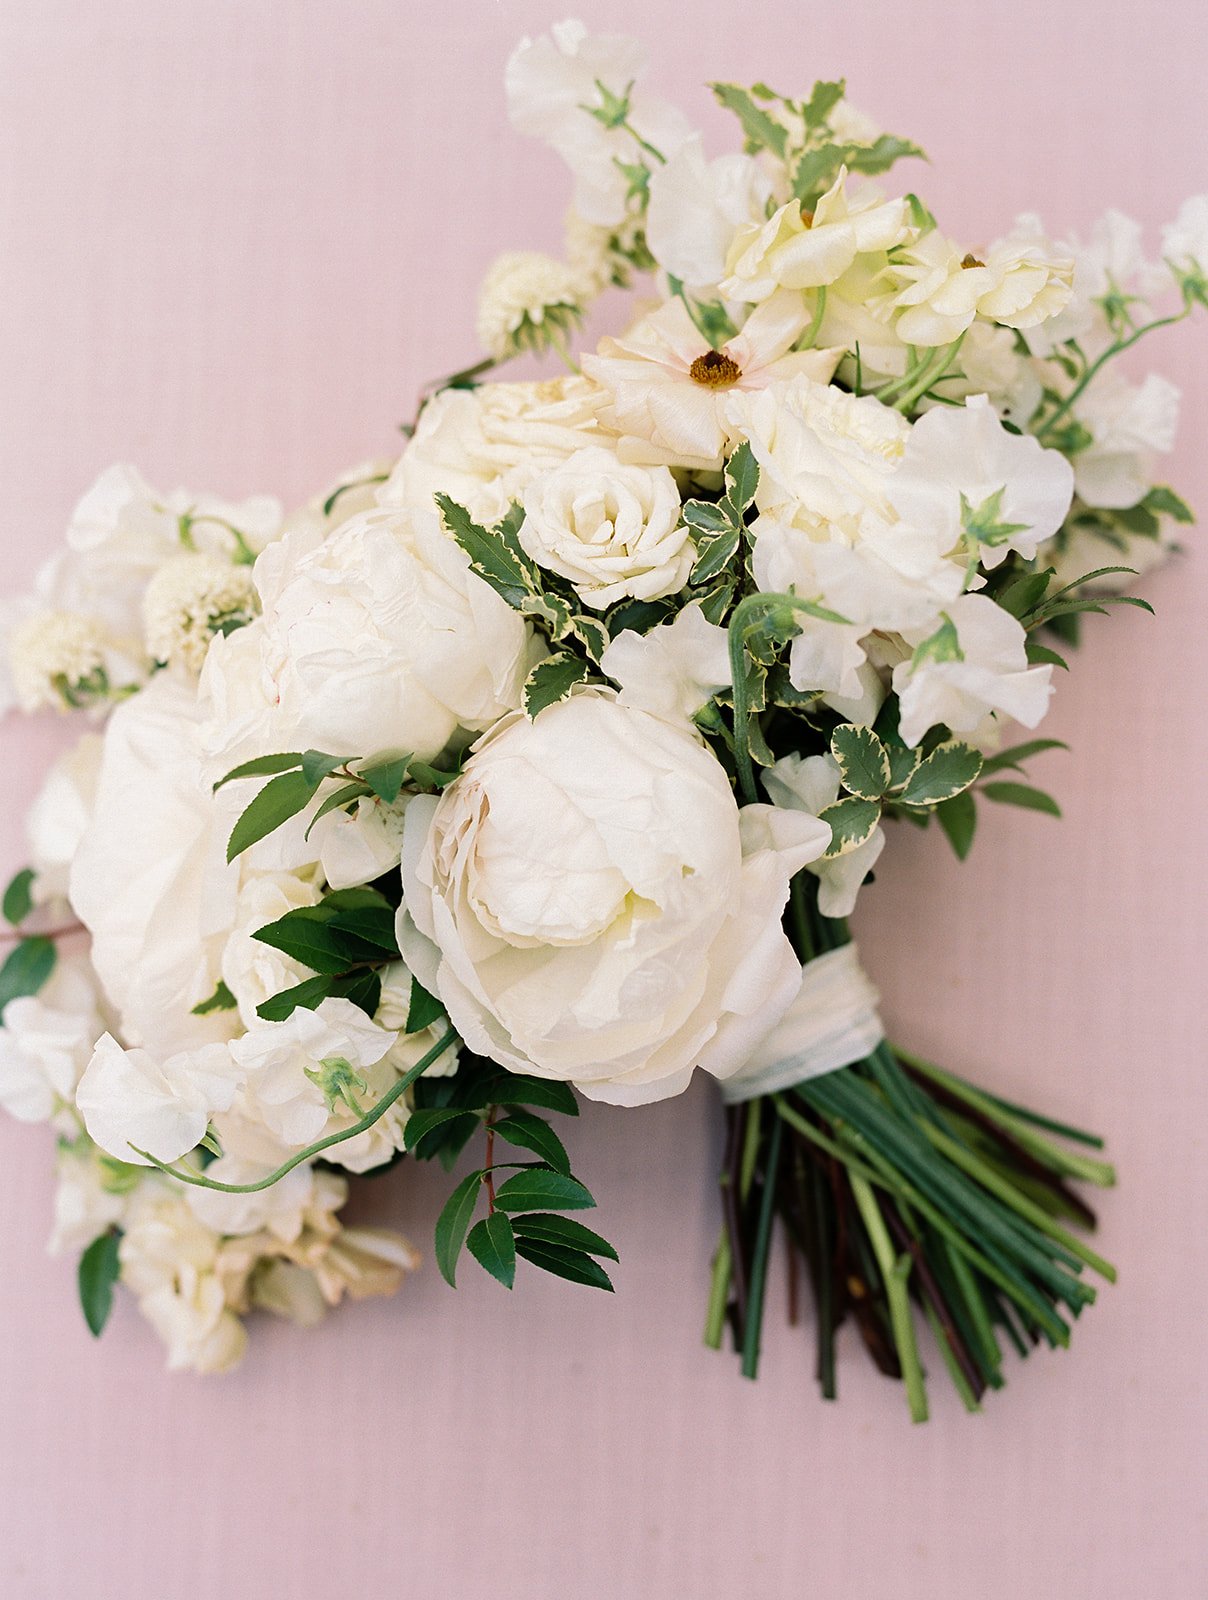 Bridal bouquet of white garden roses, peonies, ranunculus, sweet peas, scabiosa, butterfly ranunculus and dark greenery in floral hues of white, cream, and blush. Designed by Rosemary and Finch in Nashville, TN.